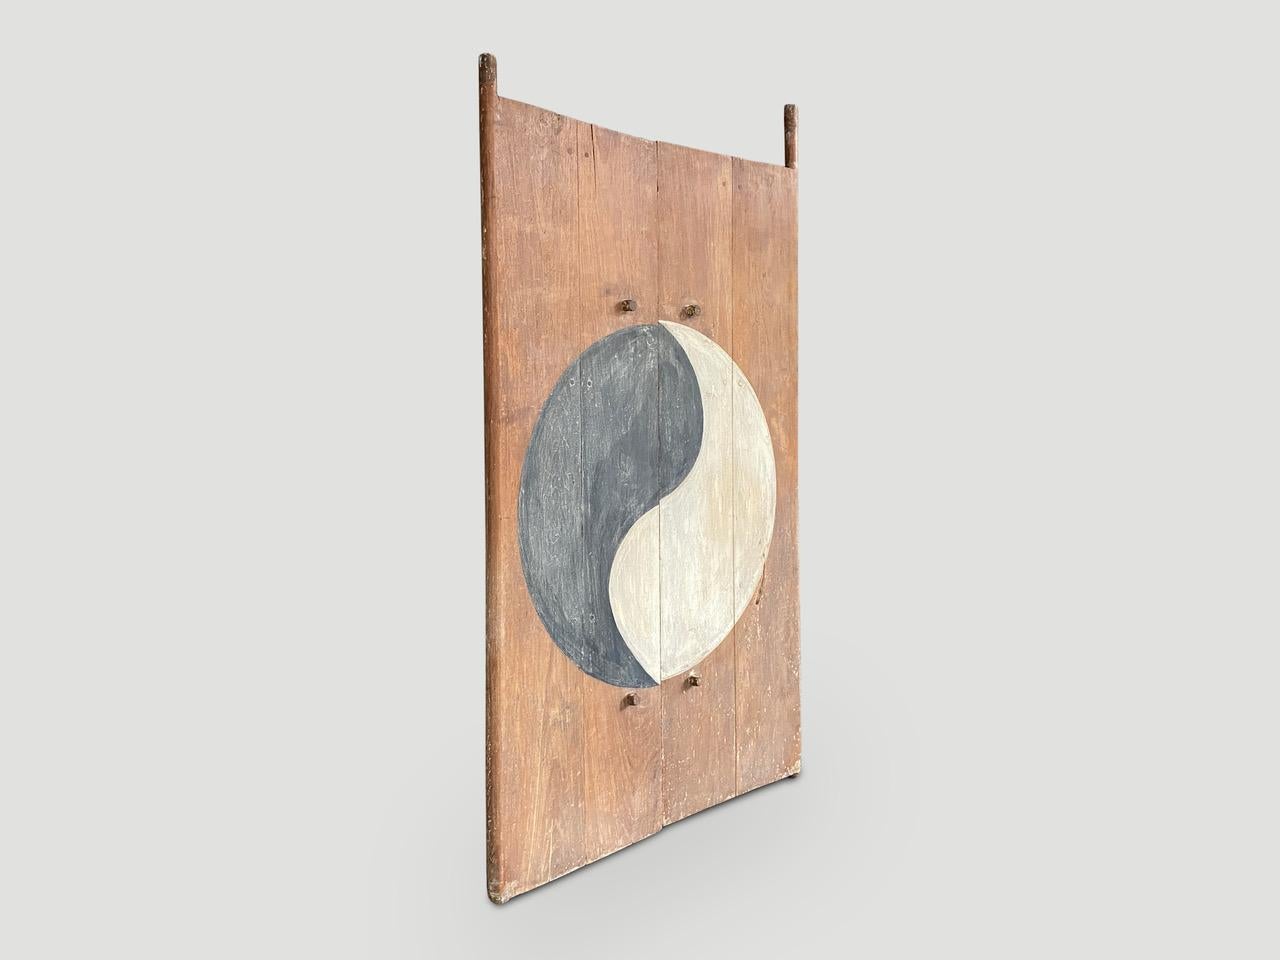 Primitive Andrianna Shamaris Yin and Yang Antique Door For Sale